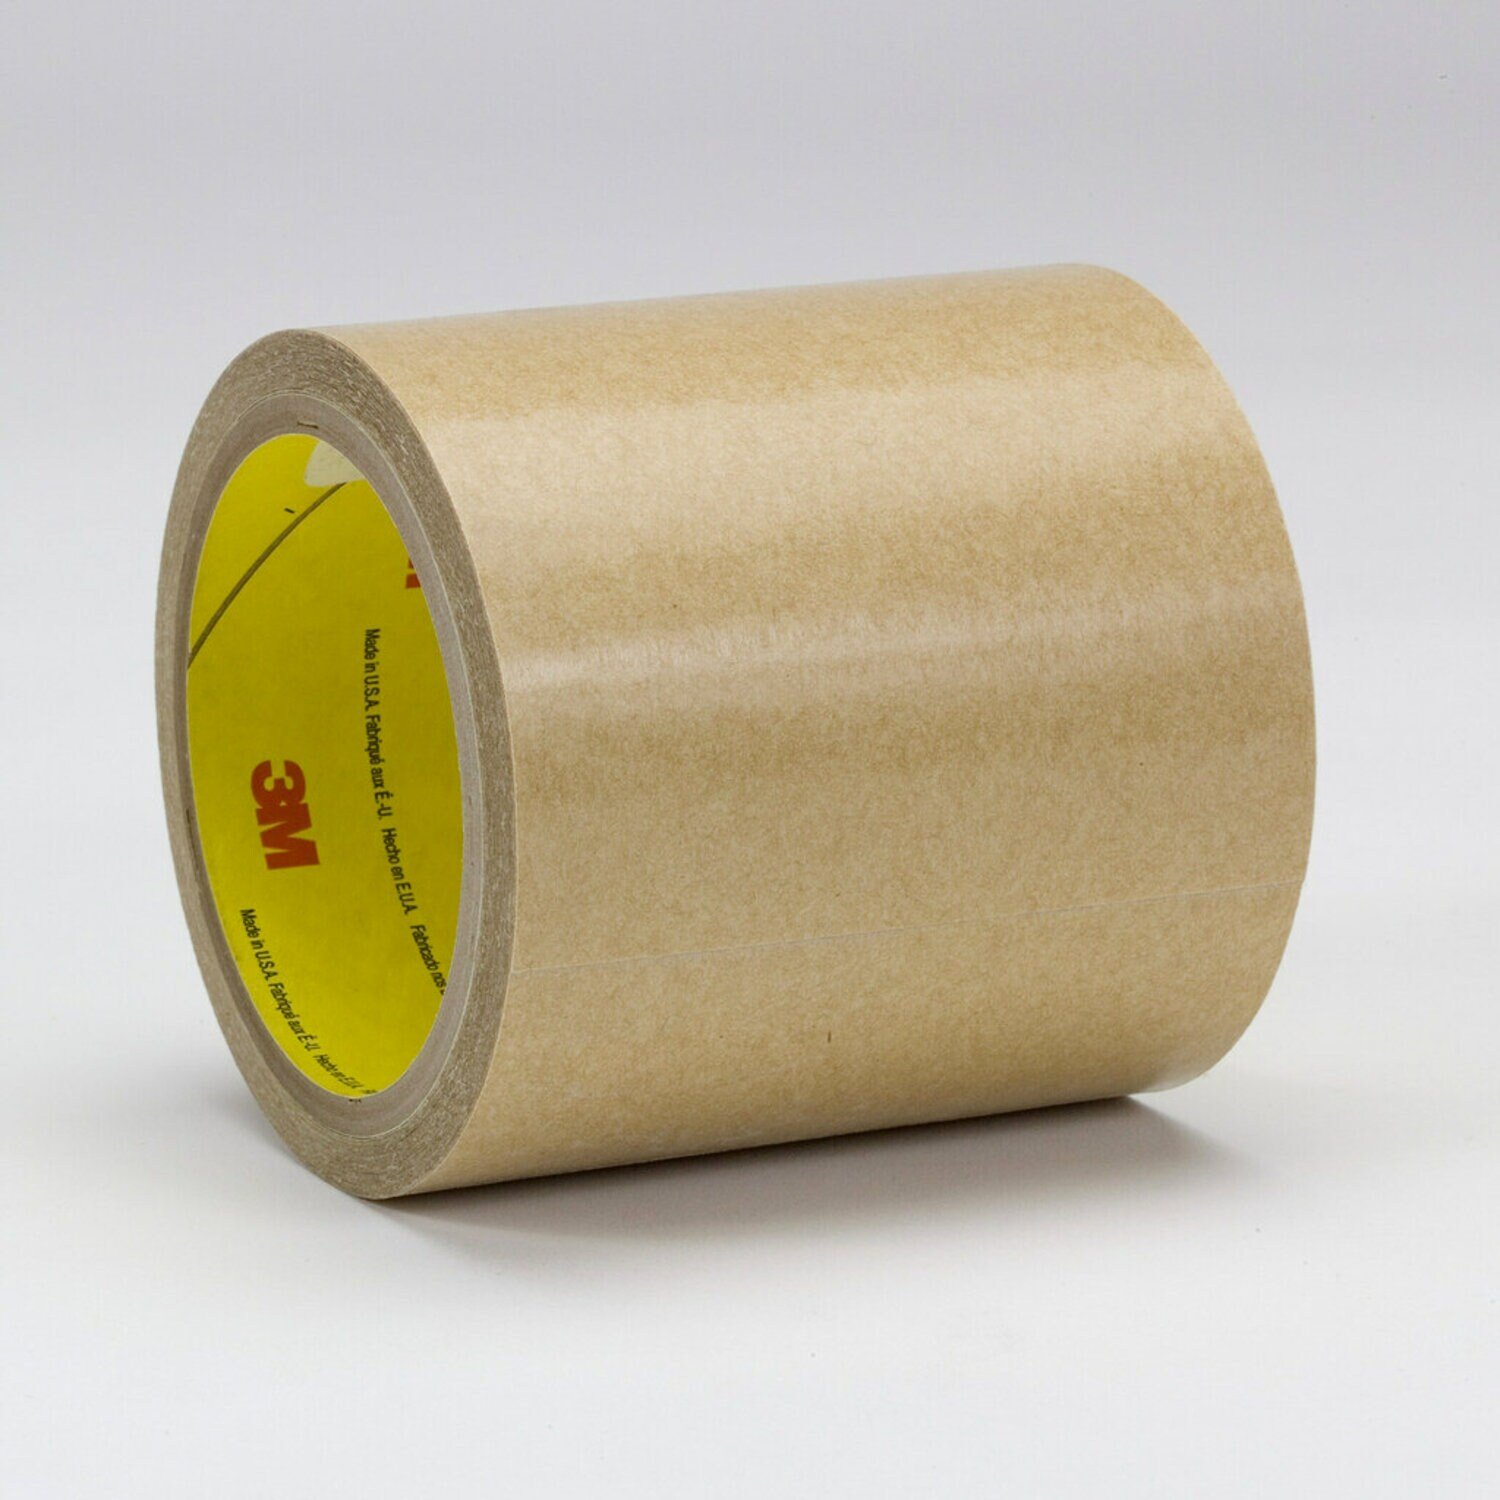 7010312098 - 3M Adhesive Transfer Tape 9458, Clear, 4.25 in x 60 yd, 1 mil, 3 rolls
per case